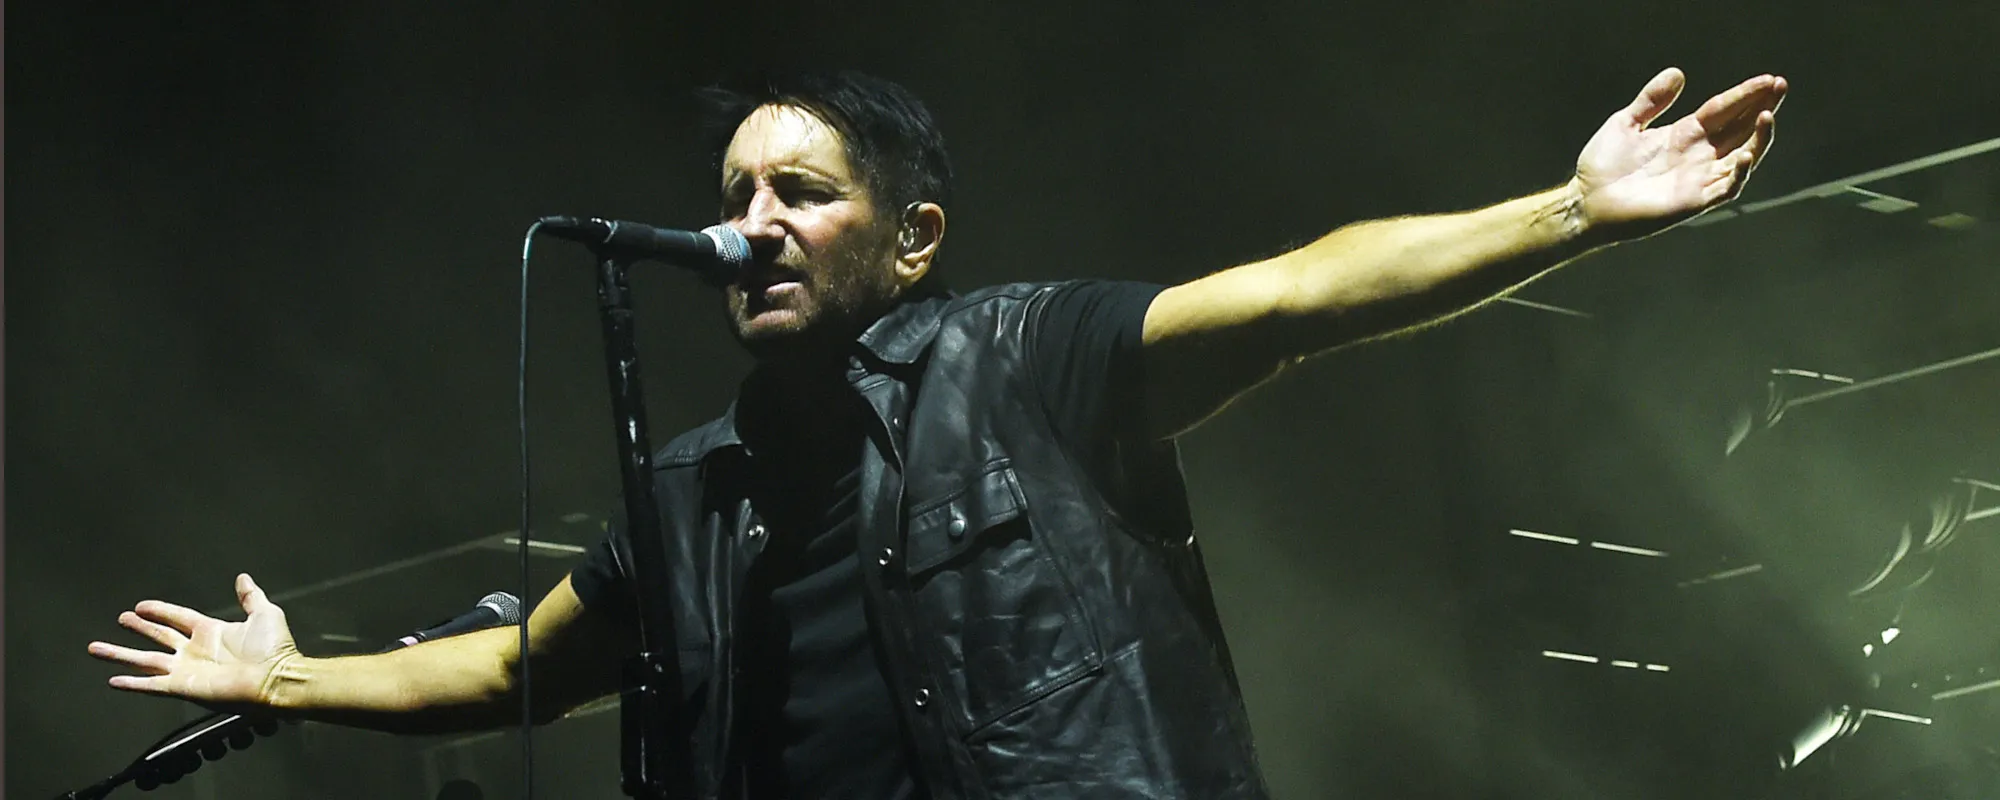 The Janitorial Origins of Nine Inch Nails